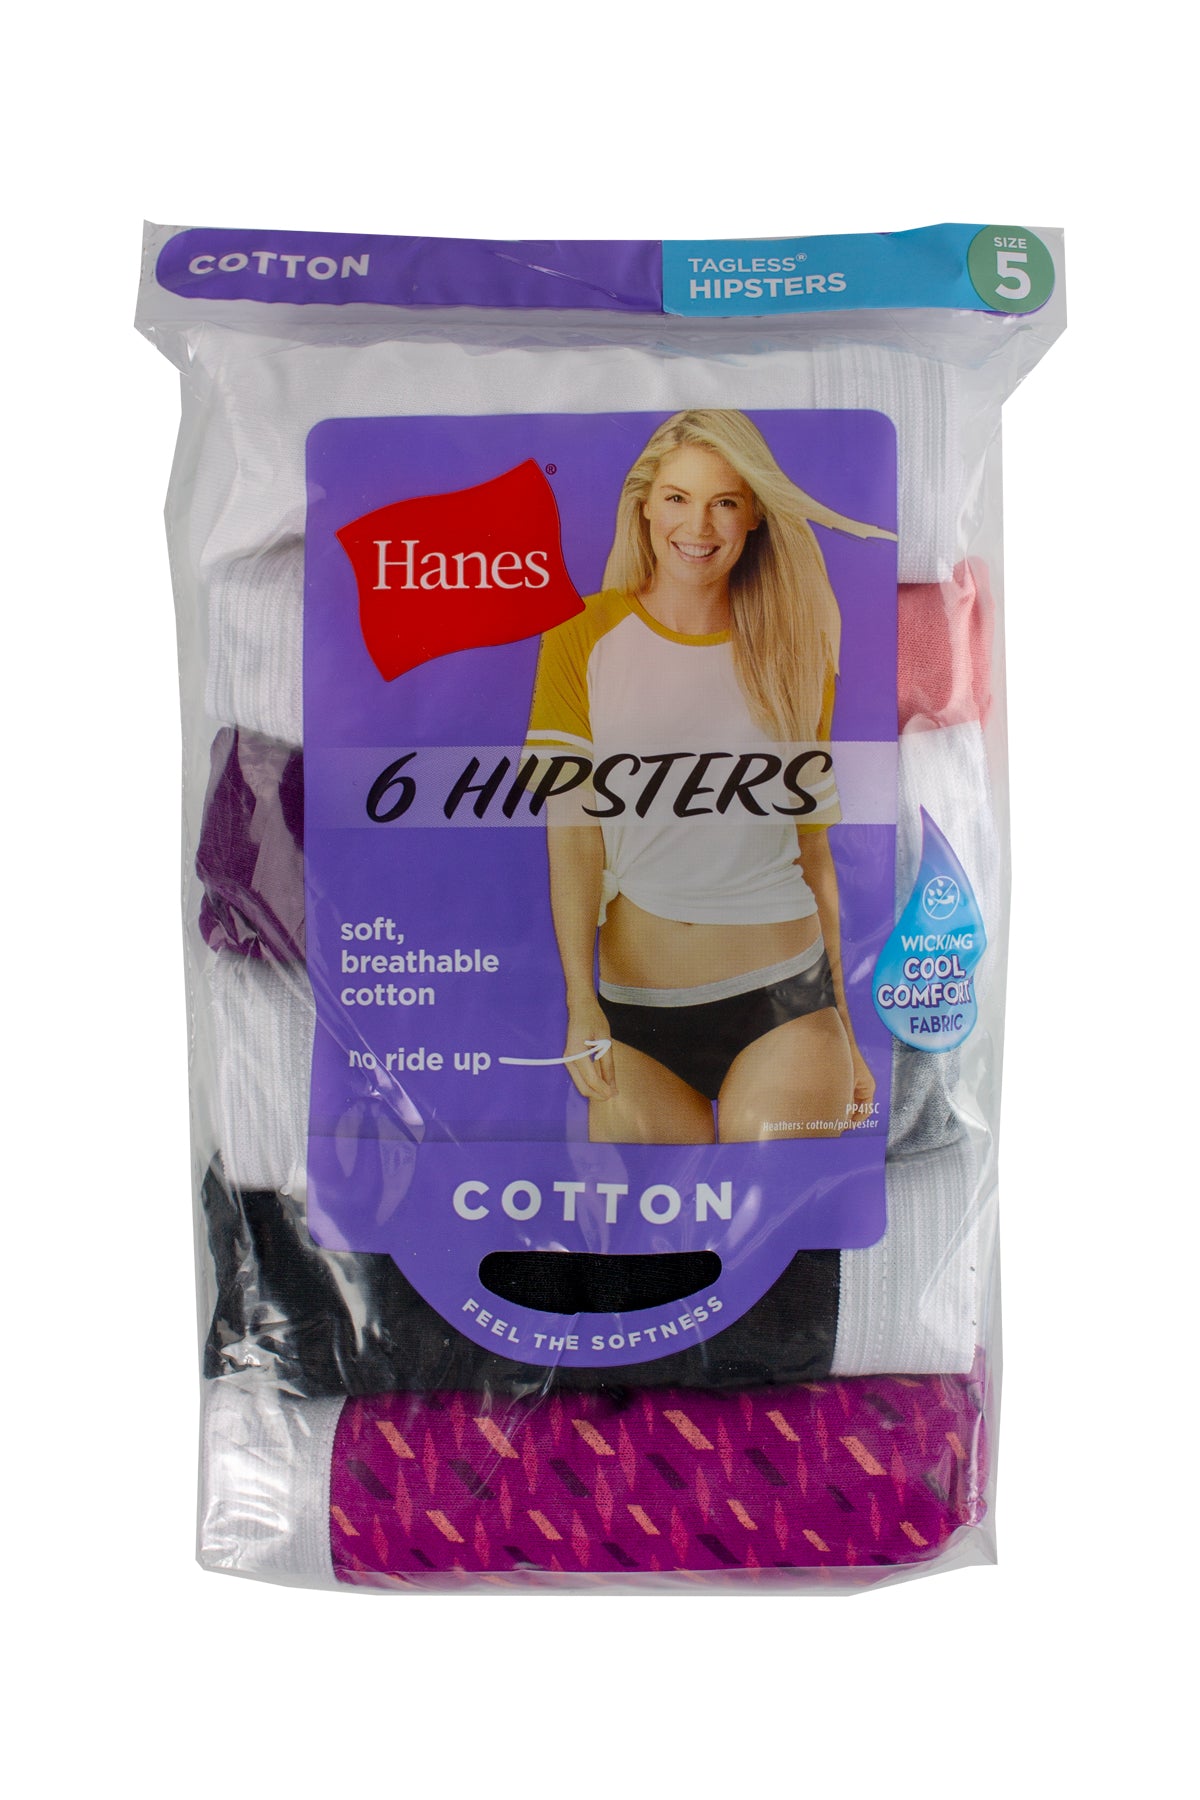 Hanes Womens' Tagless Cotton Hipsters - 6 Pack